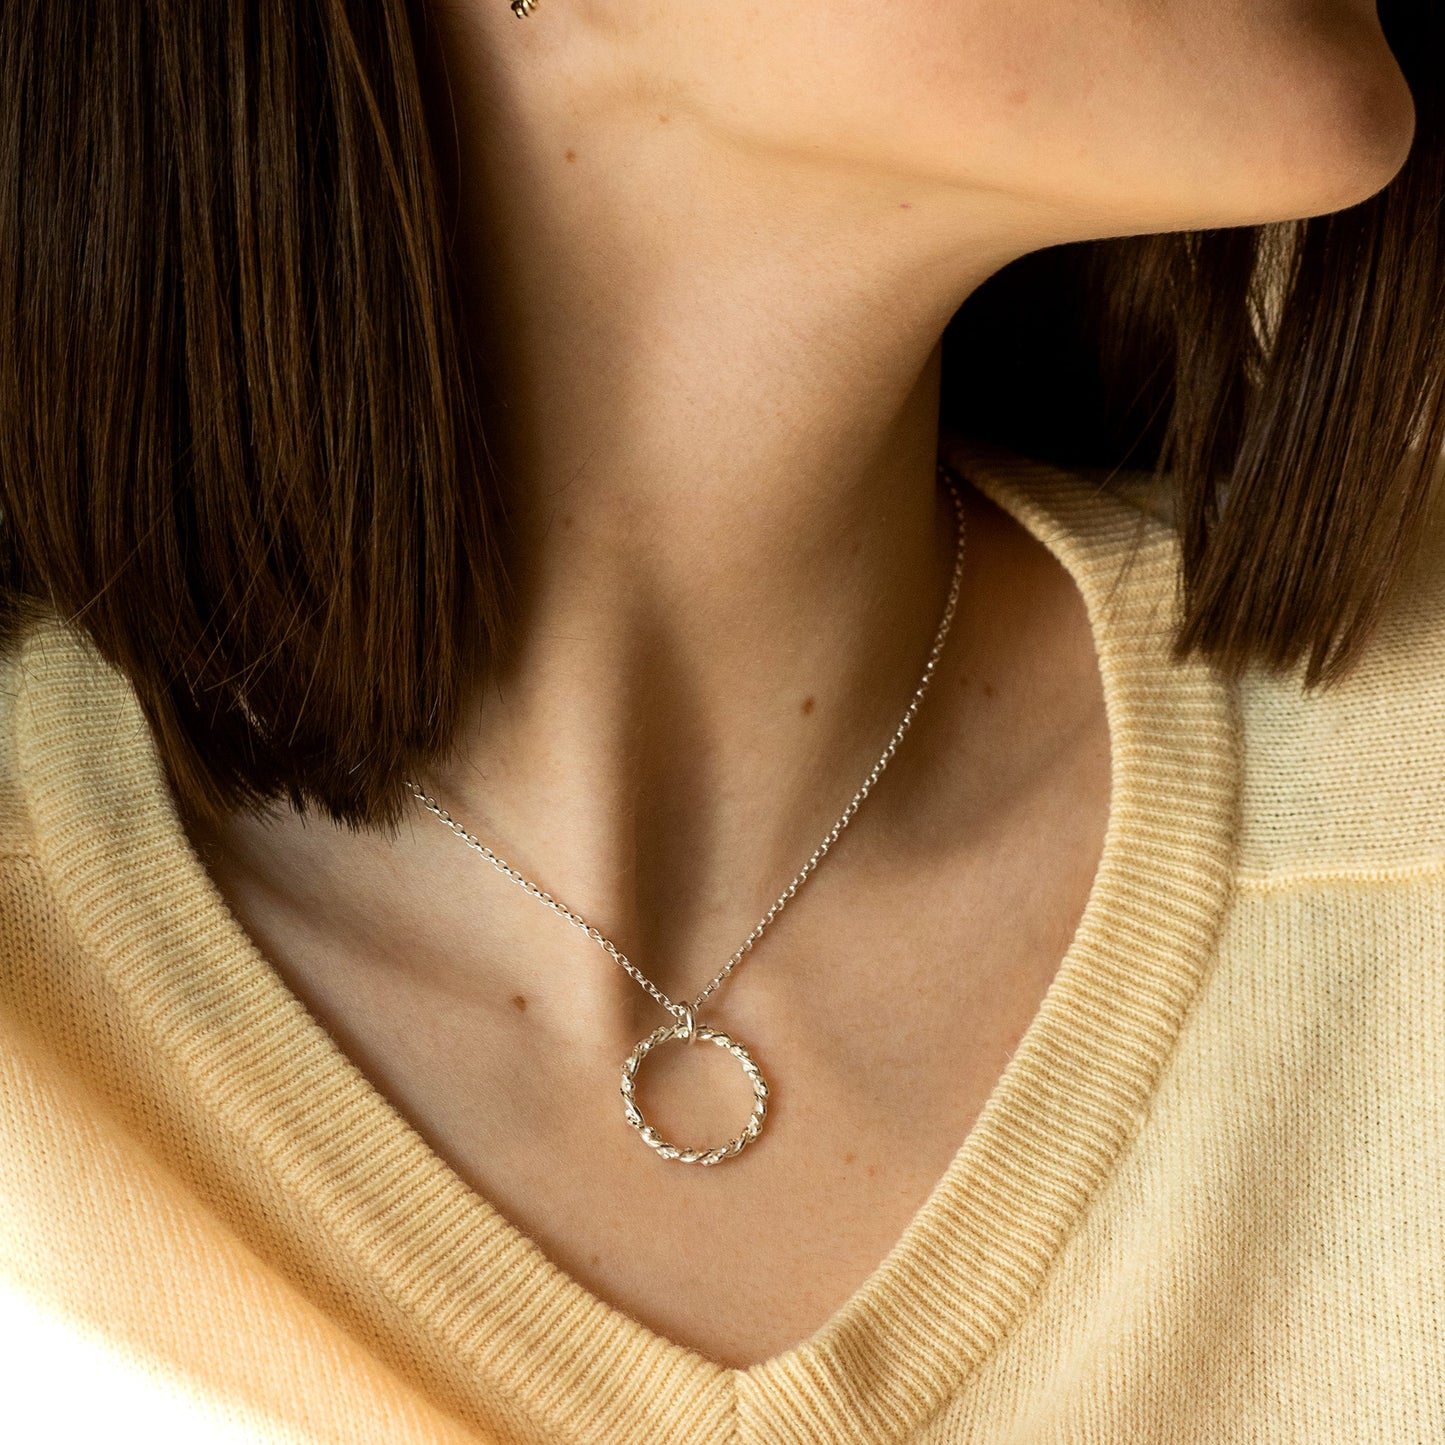 Entwined Halo Necklace - Silver - Linked for a Lifetime